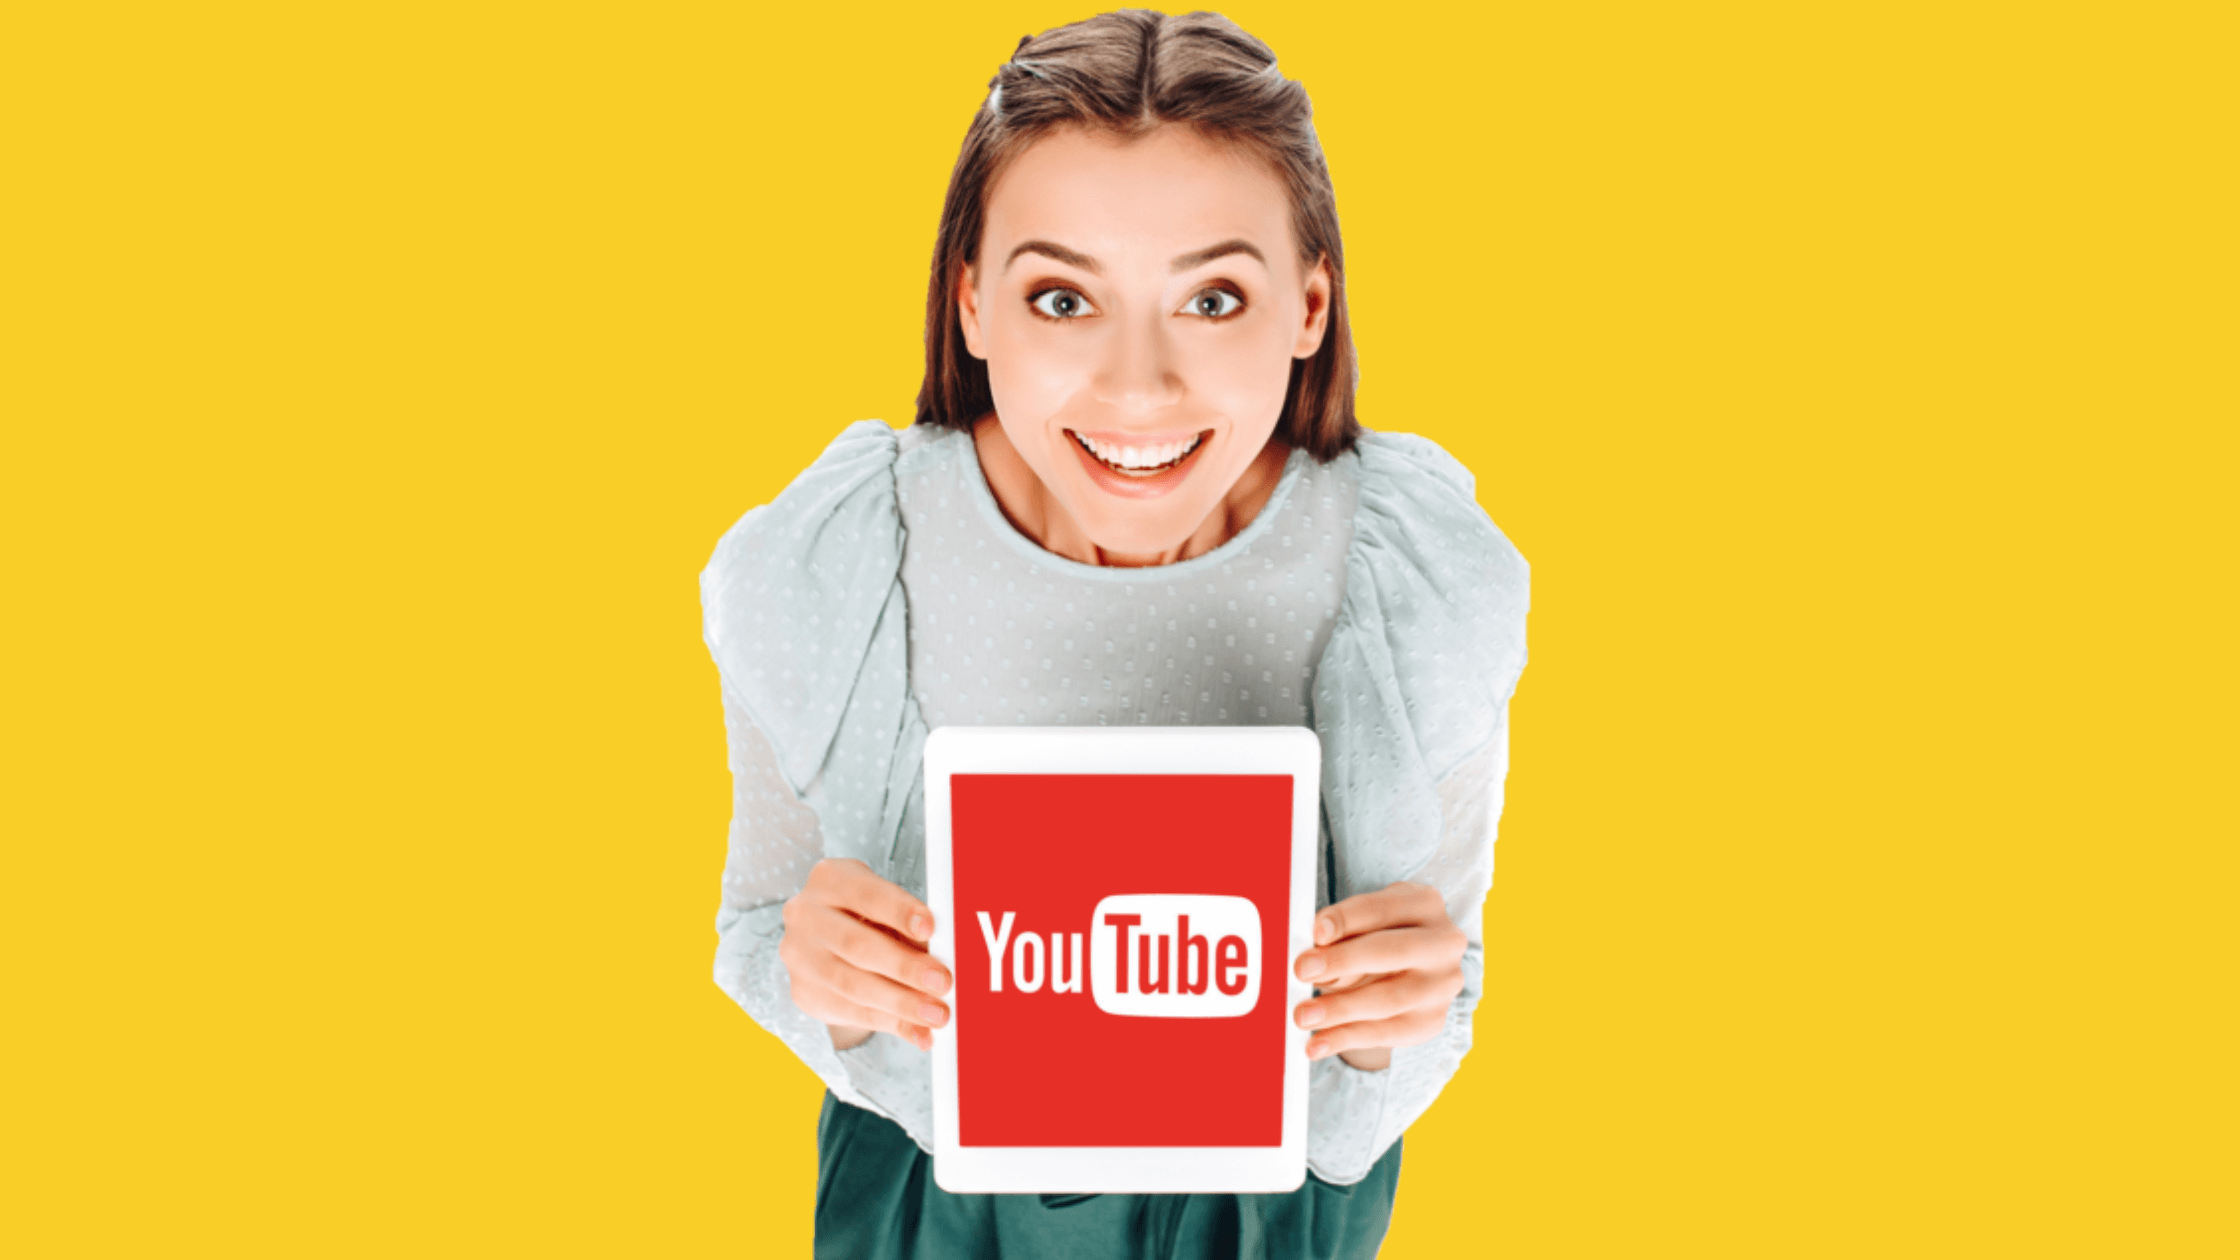 How to Make Money on YouTube by Making Videos